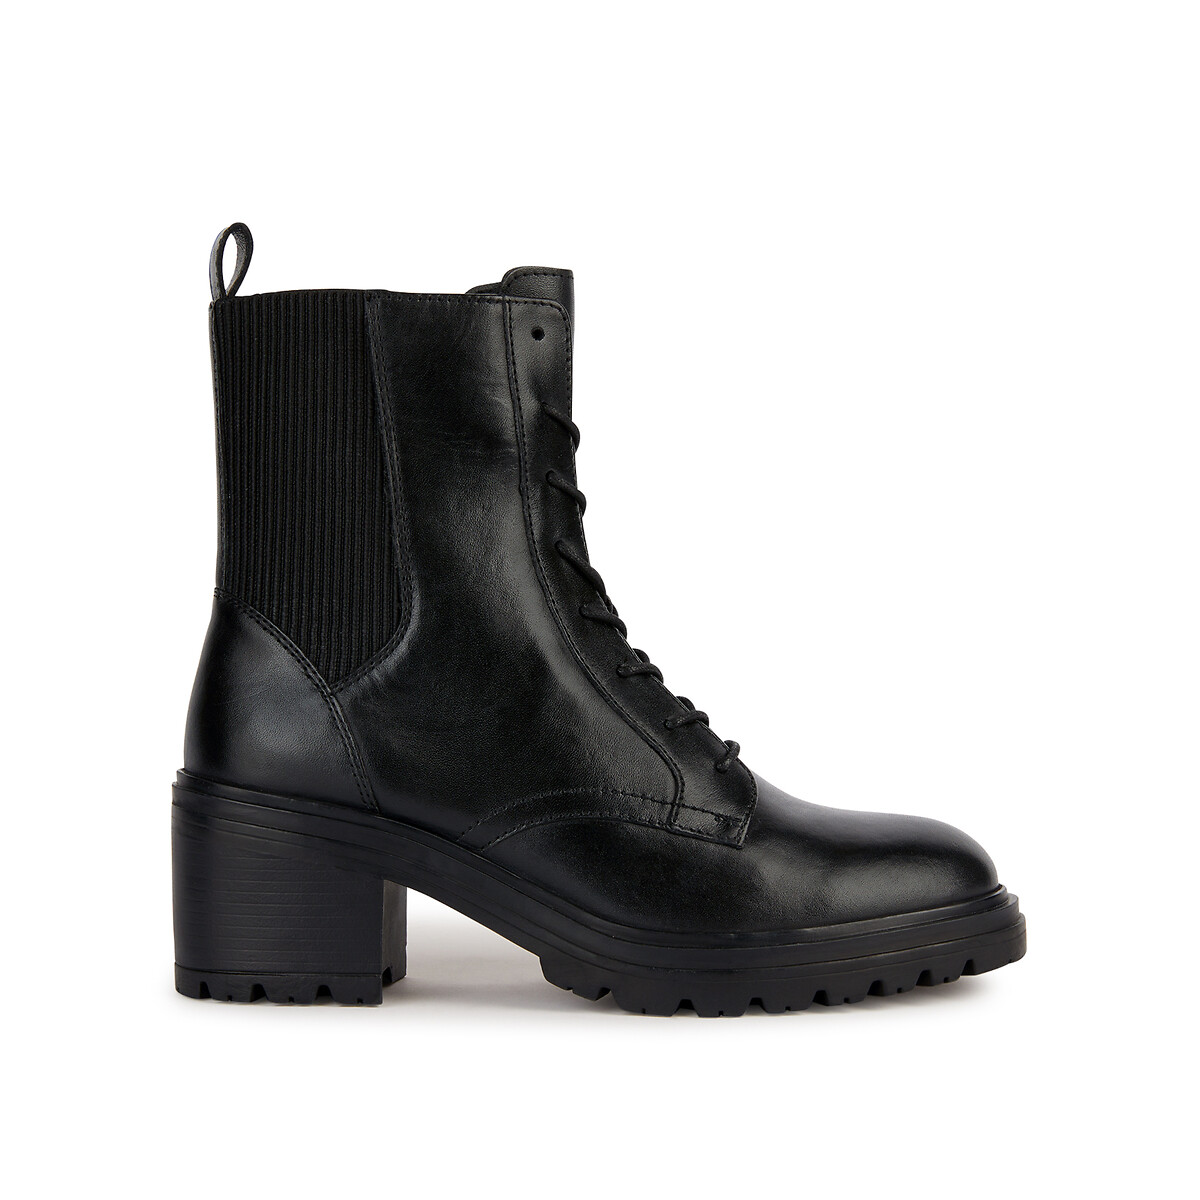 Damiana Lace-Up Ankle Boots in Breathable Leather